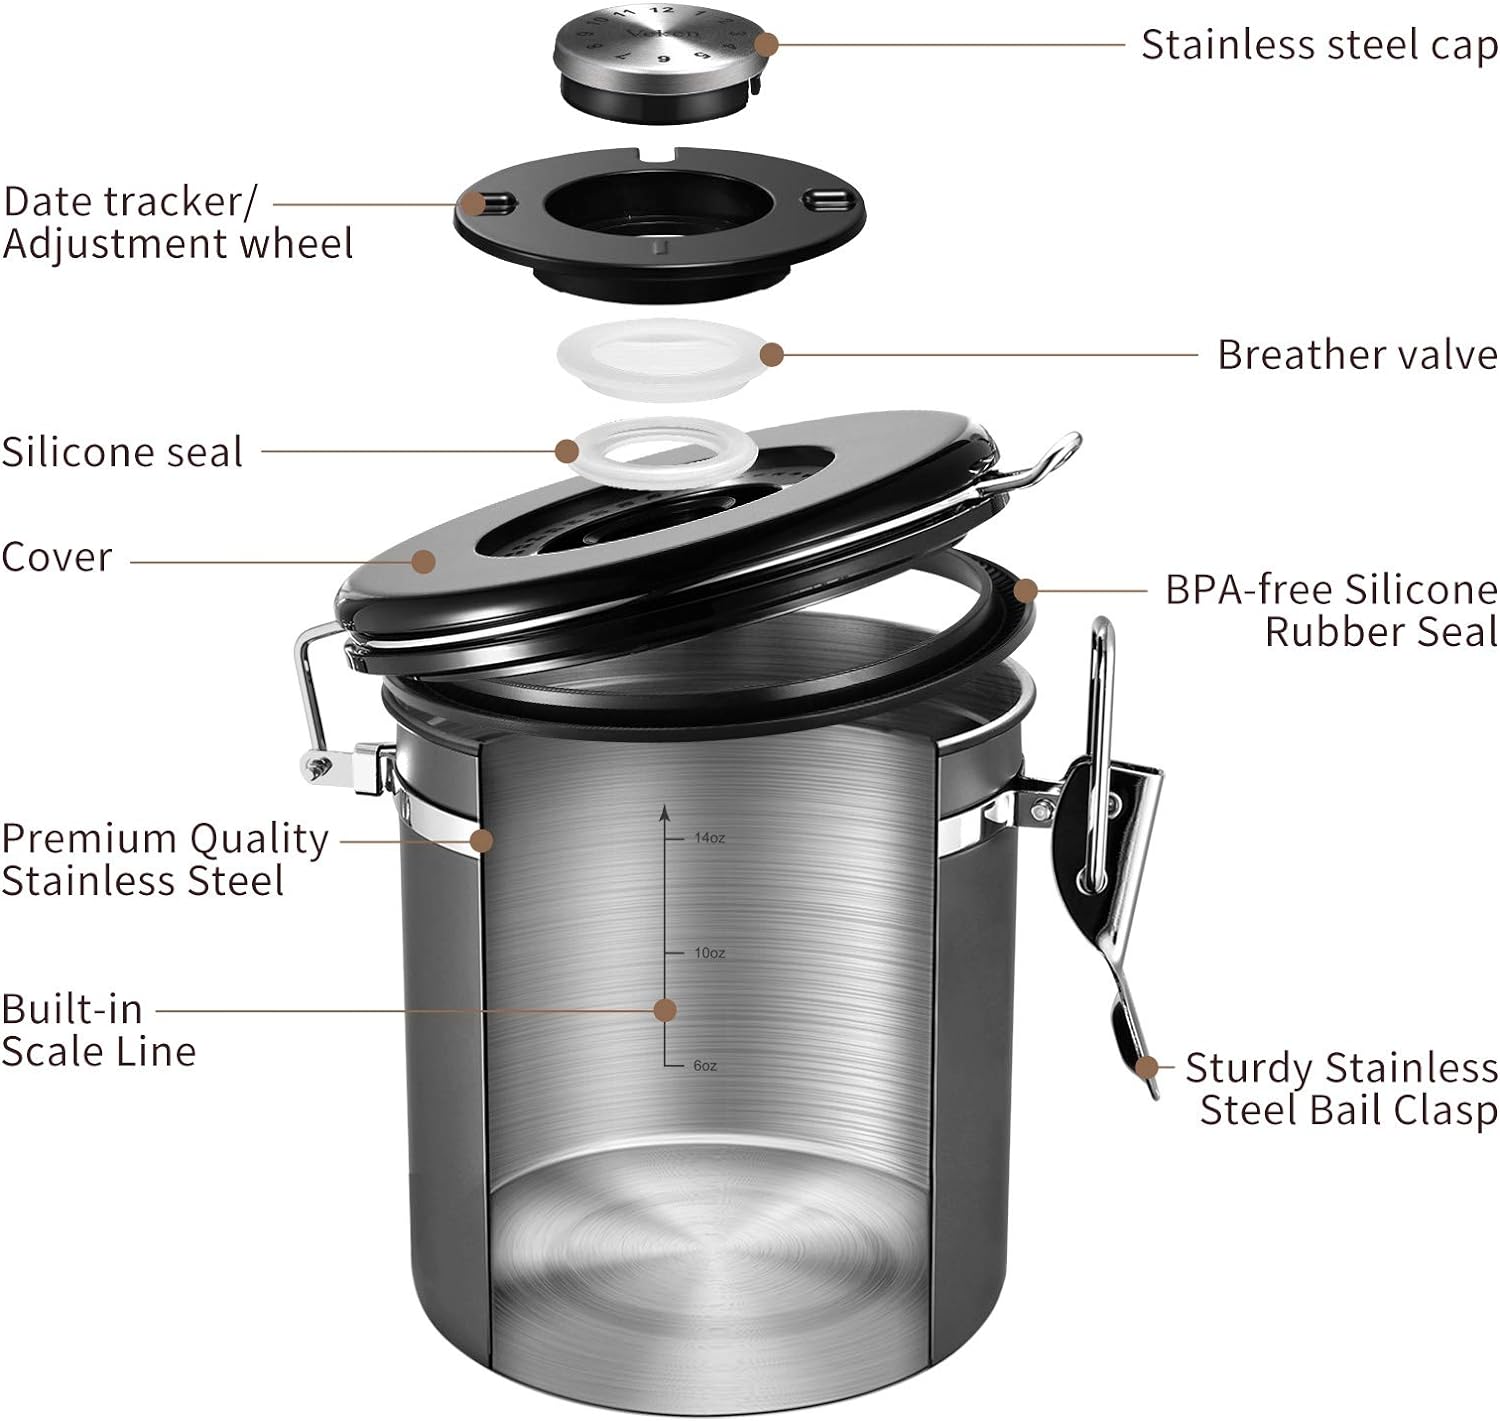 Coffee Canister | Stainless Steel | 16OZ | Gray | Veken - aborderproducts